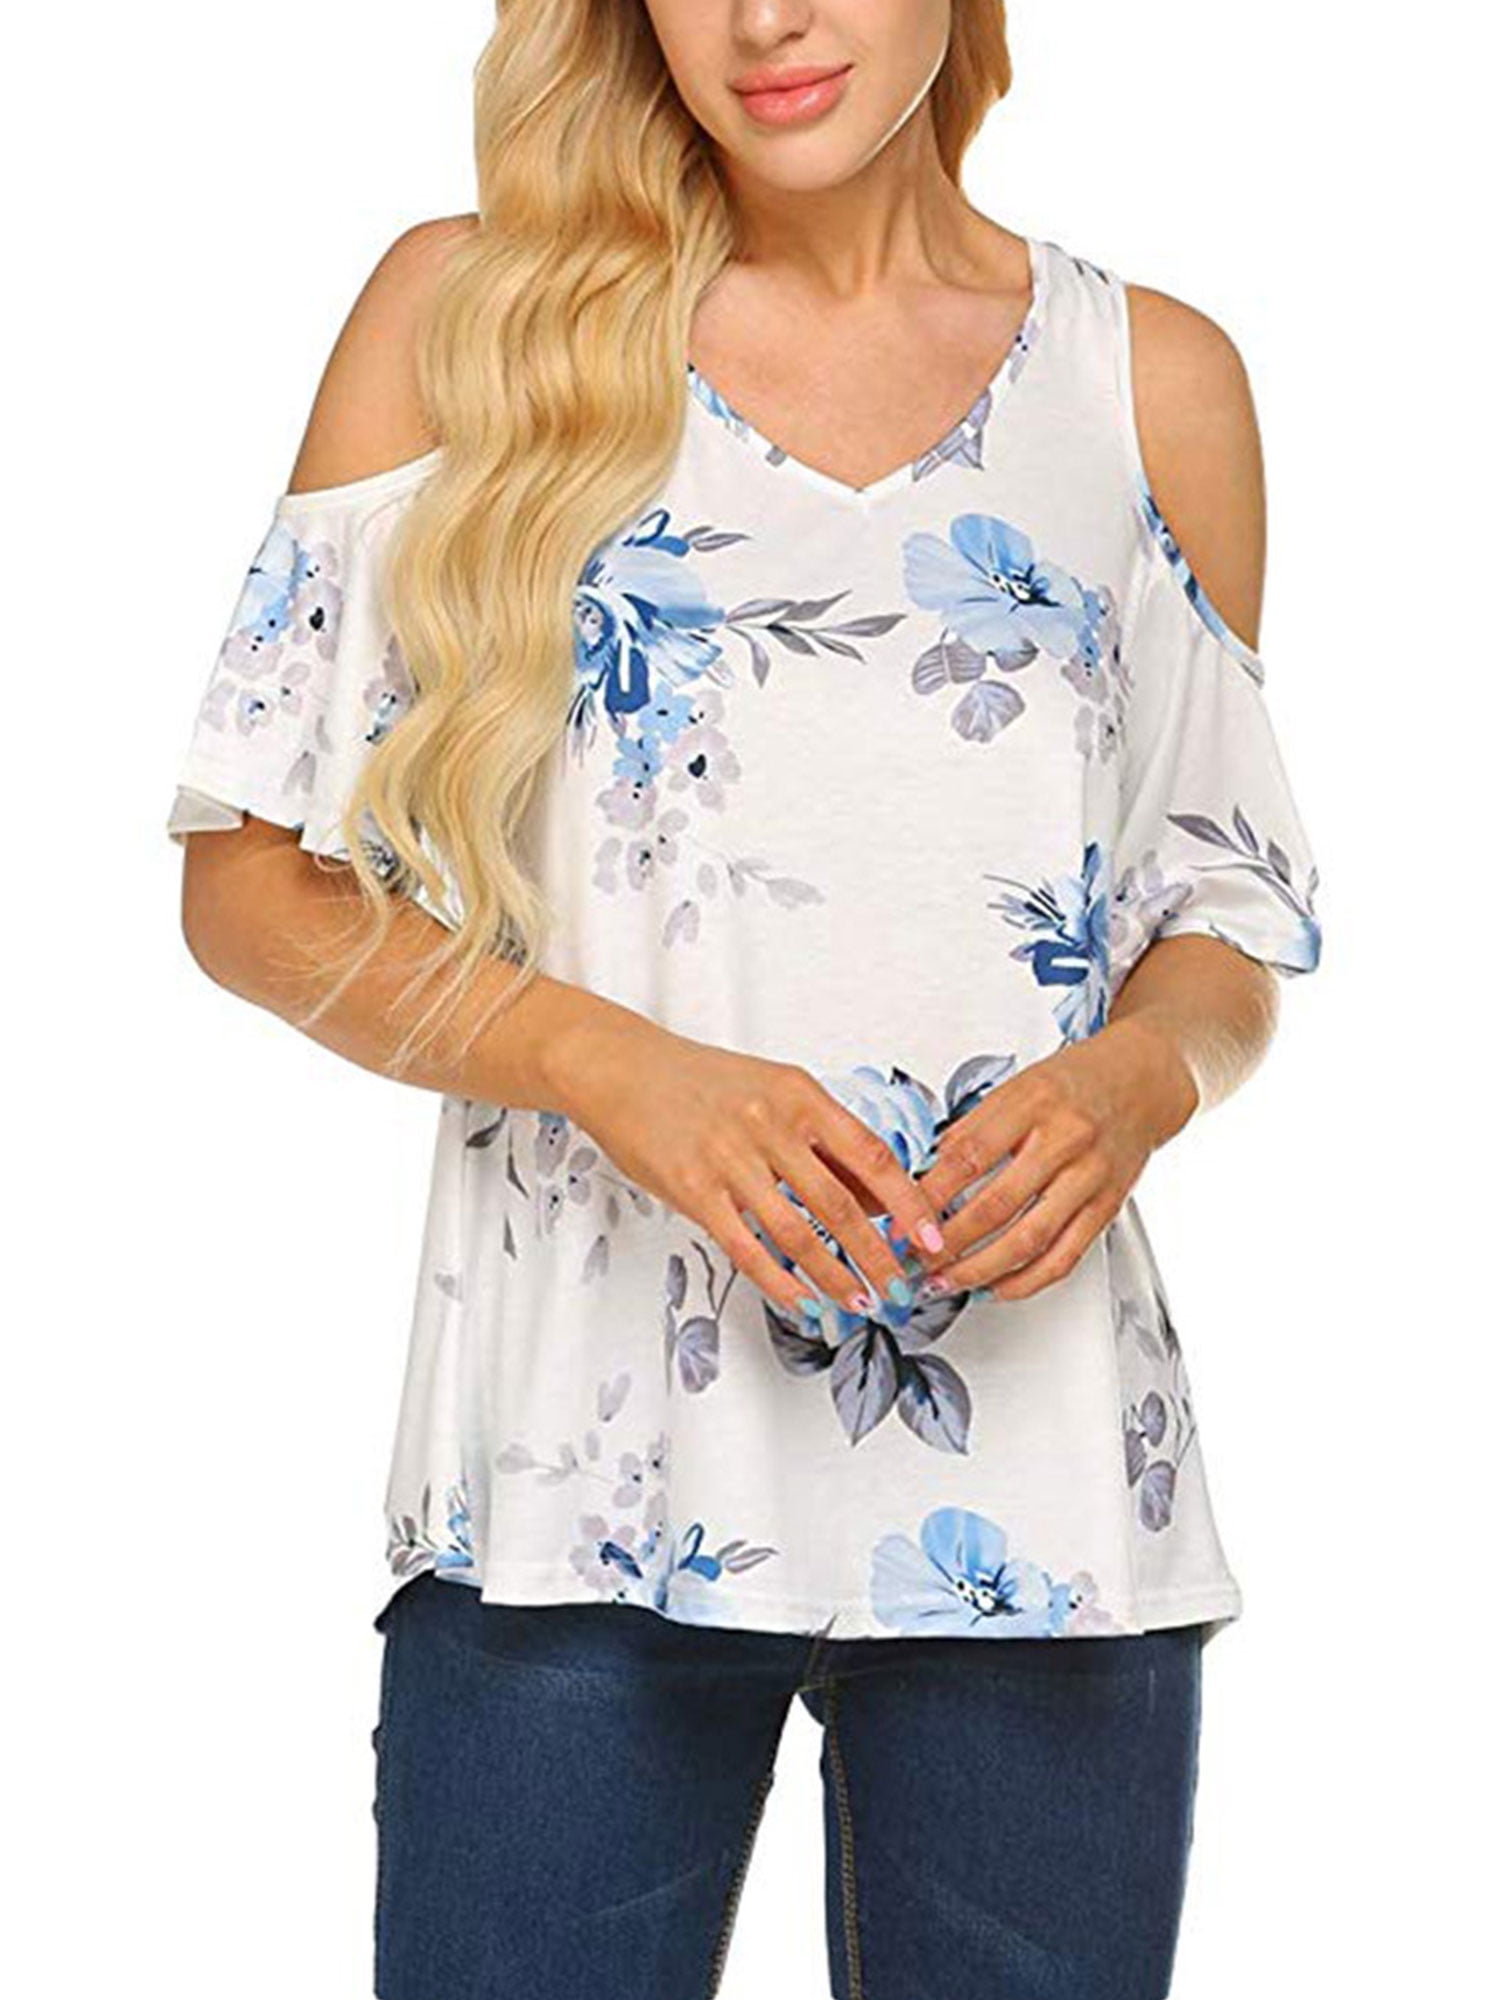 Women's Summer Cold Shoulder Loose Top Short Sleeve Blouse Casual Tops T-Shirt 